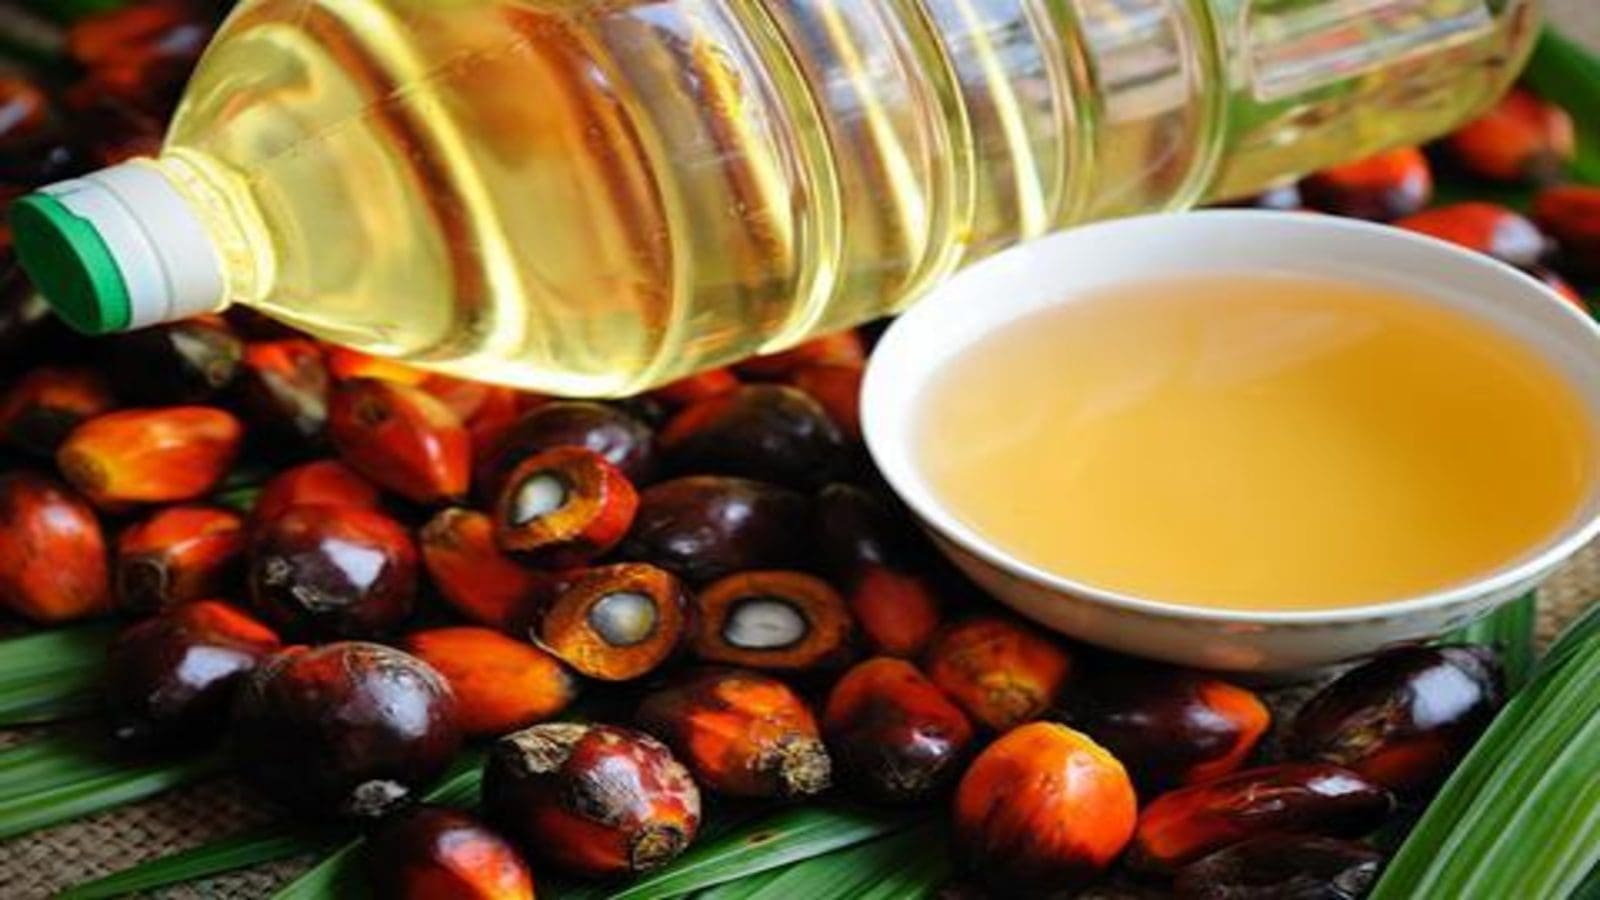 Dekel Agri-Vision achieves a 108.4% jump in crude palm oil output to hit 6,179 tonnes